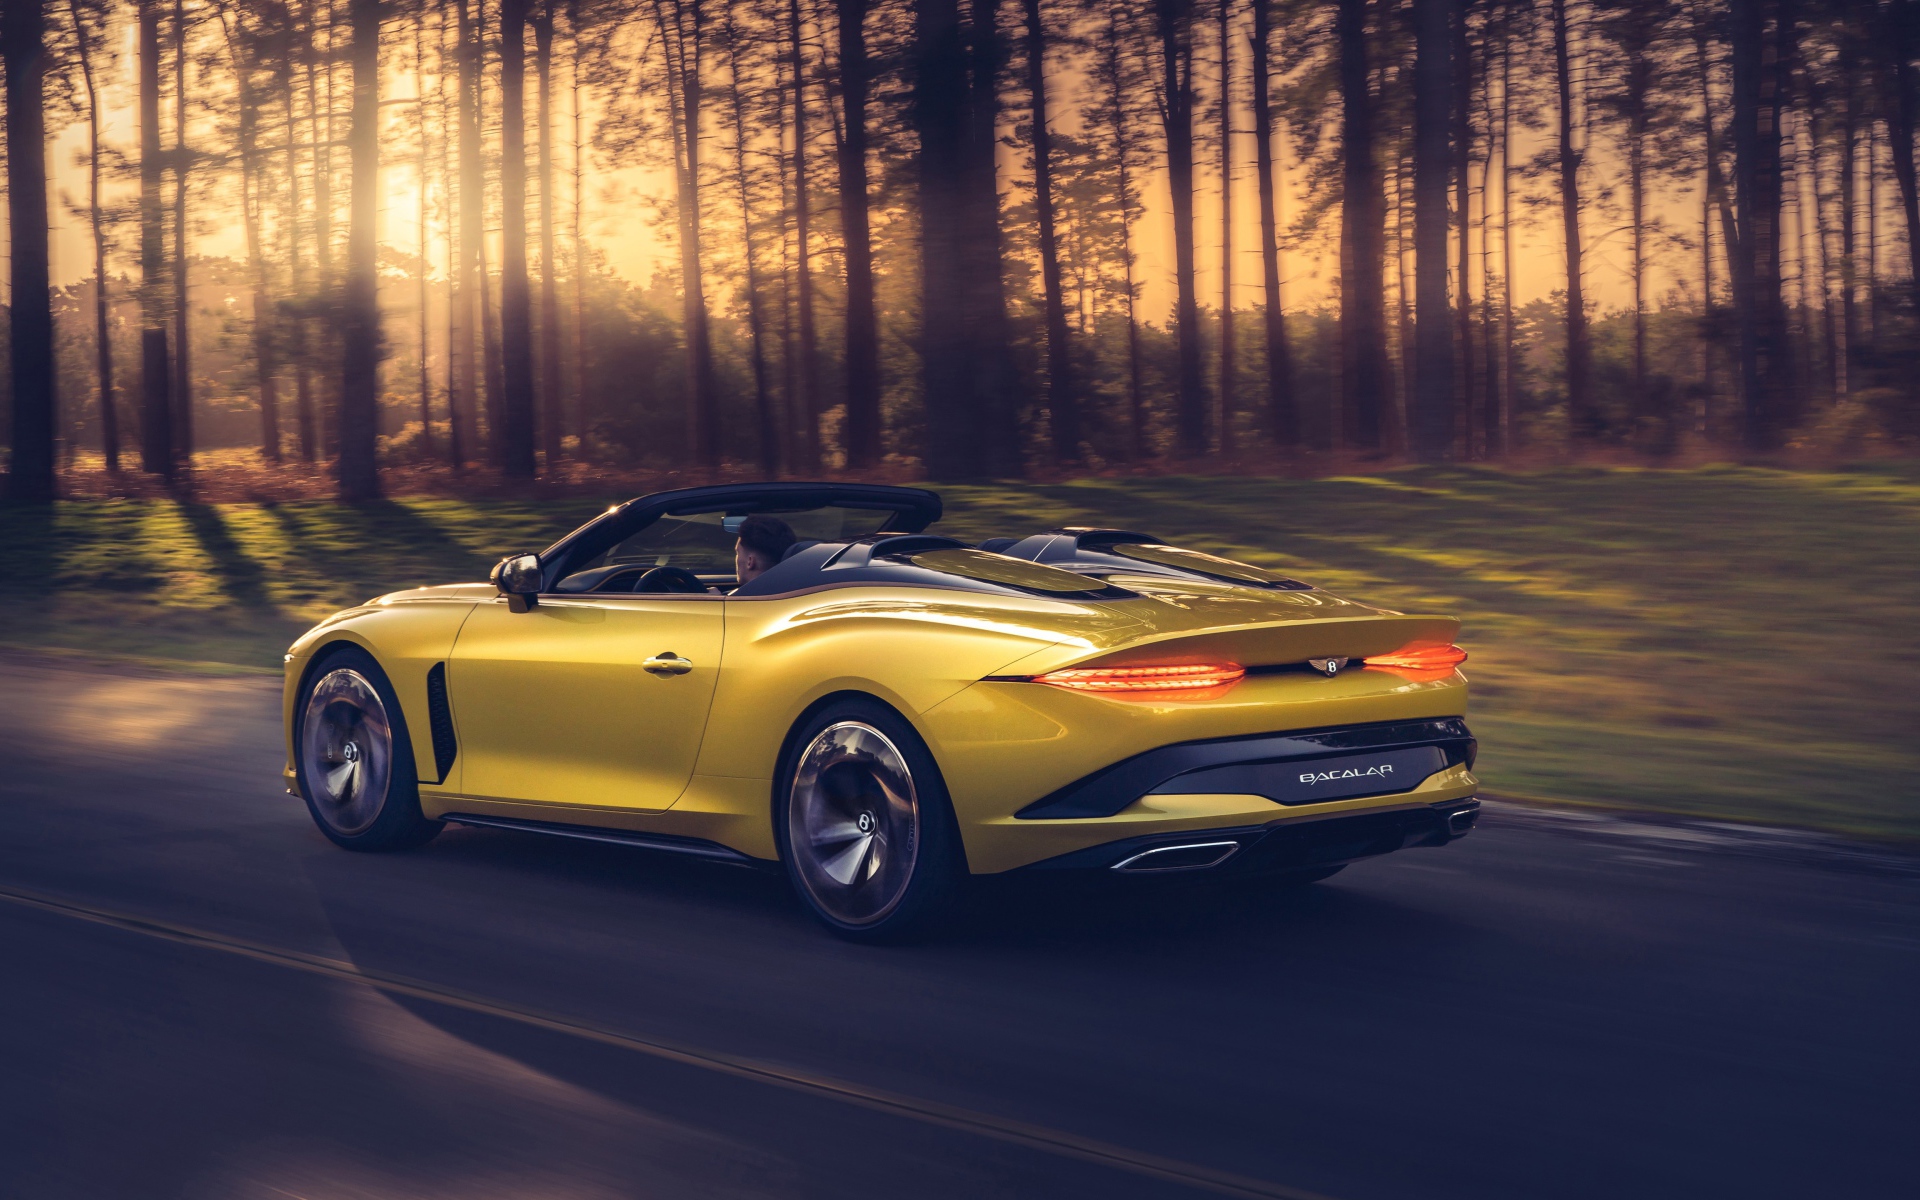 2020 yellow Bentley Mulliner Bacalar car in the forest